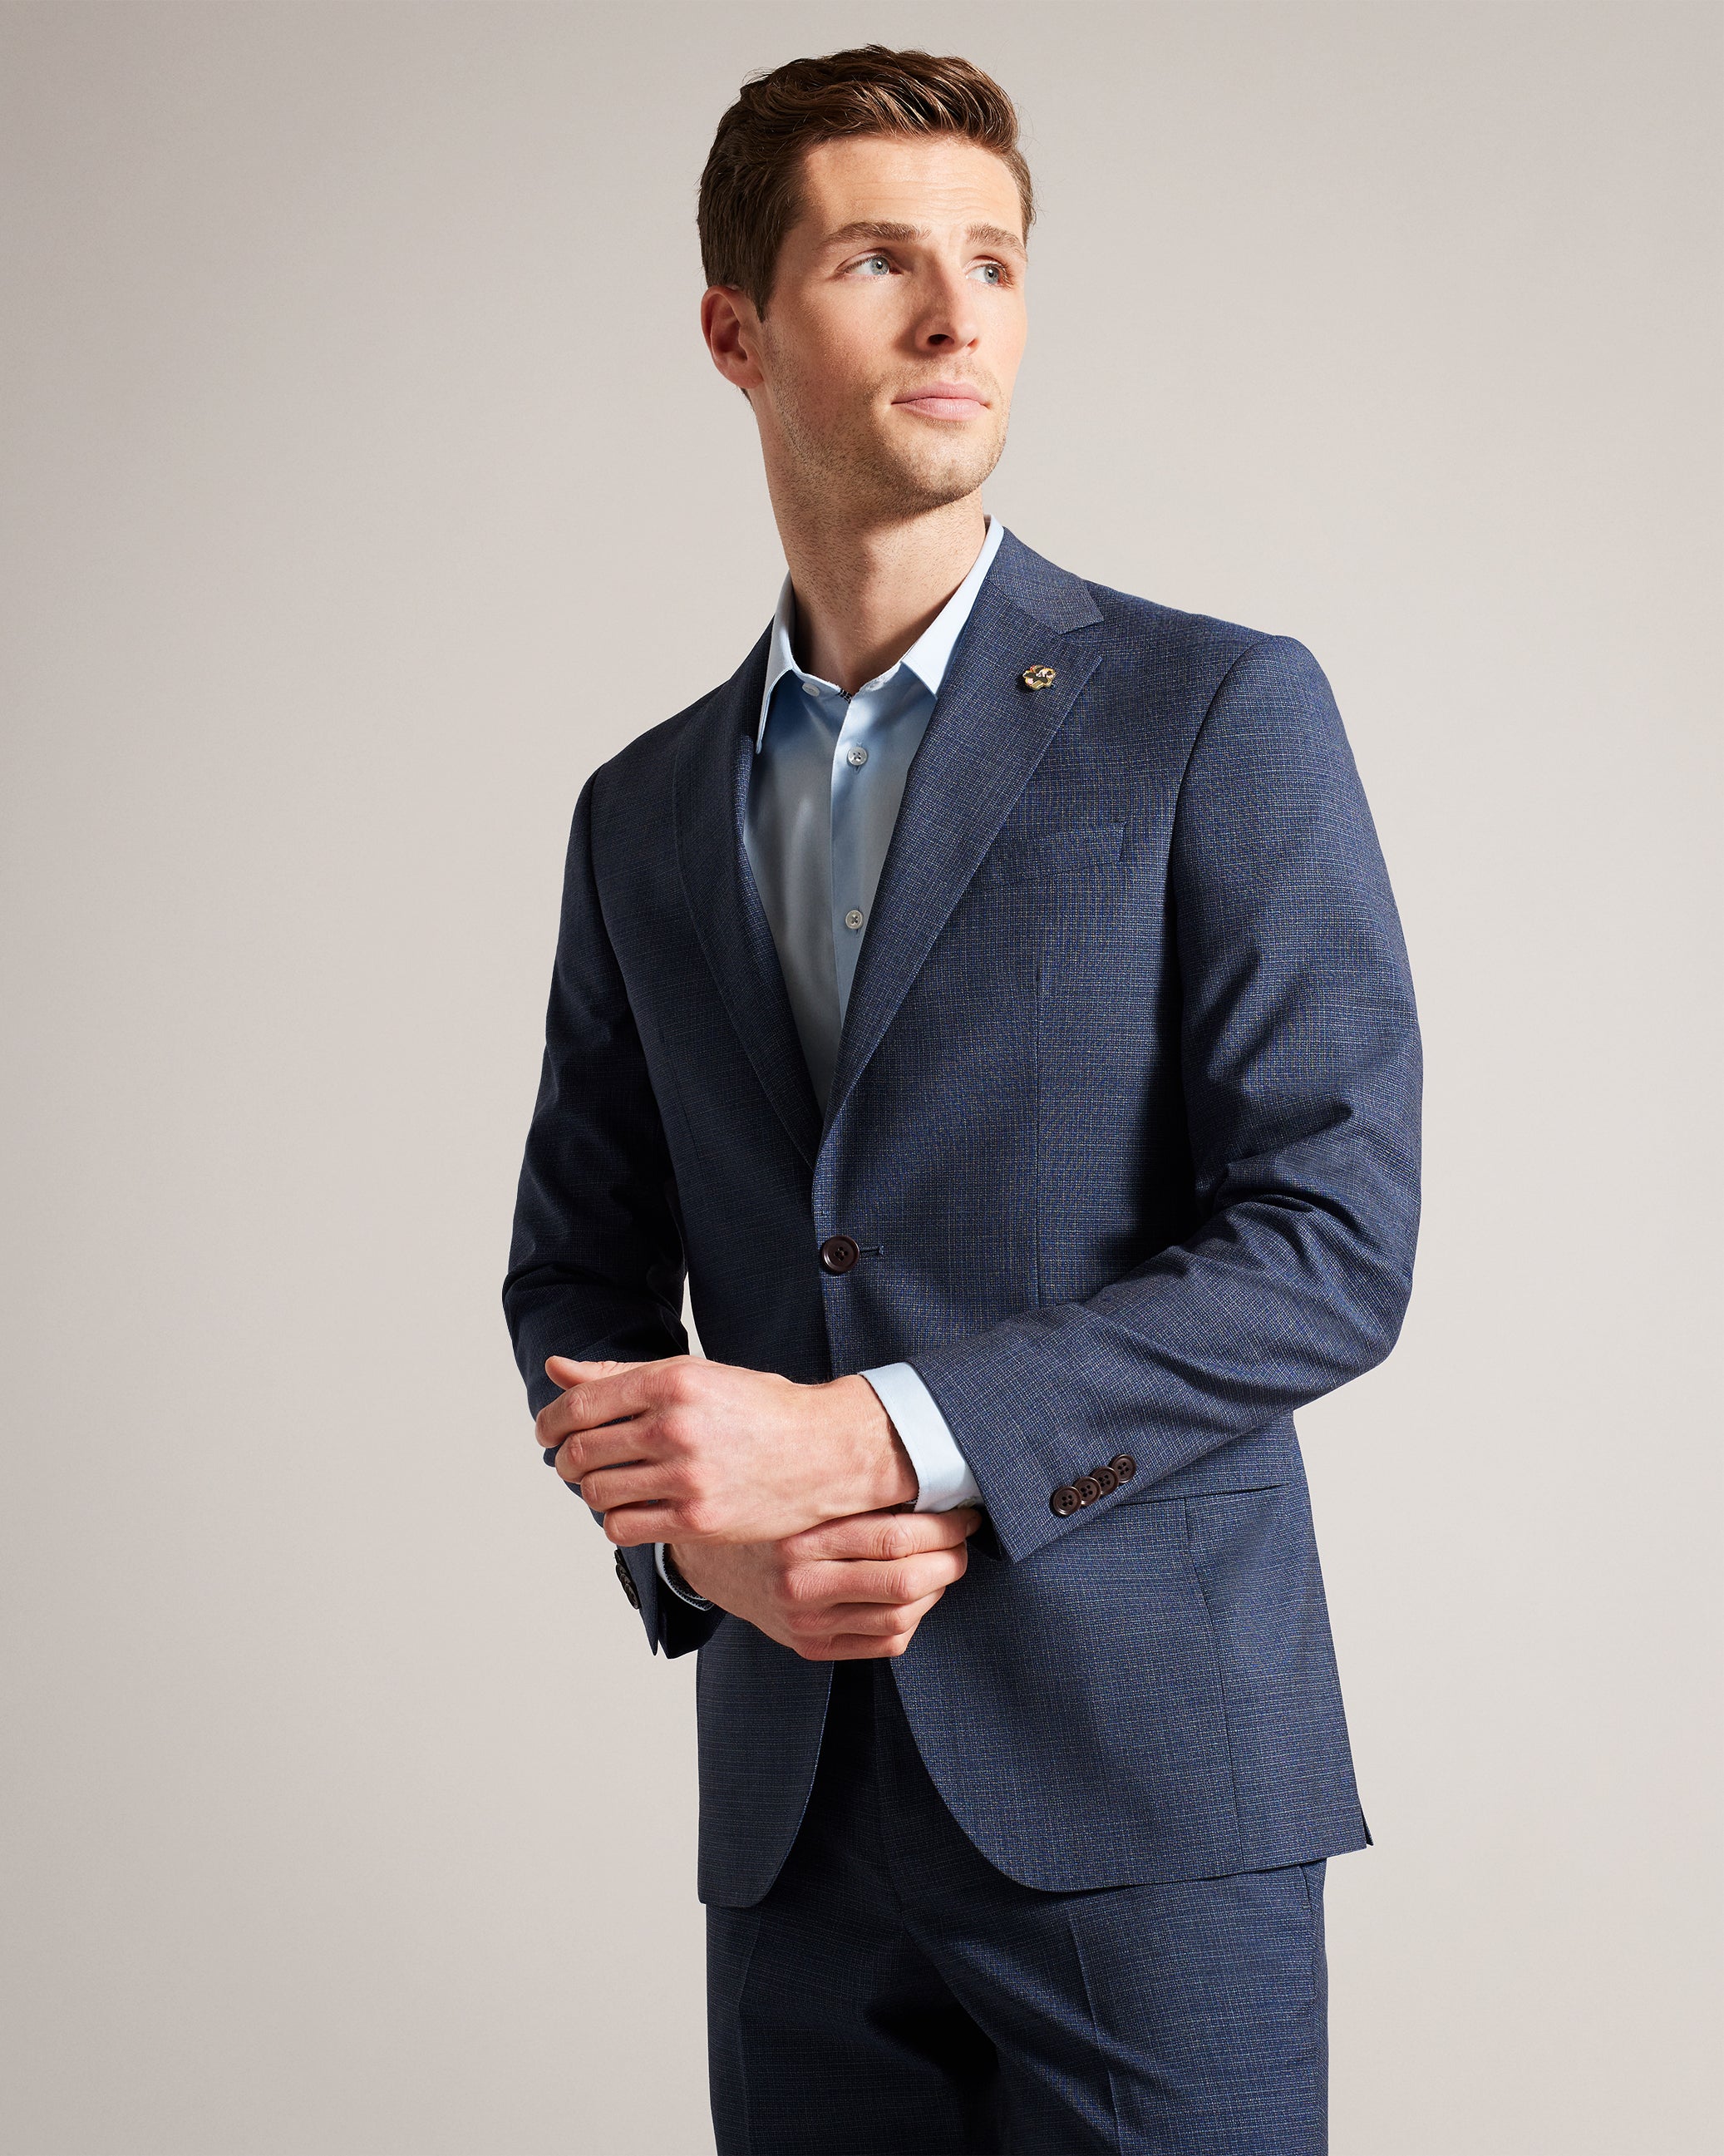 Men's Landing Page – Ted Baker, Canada